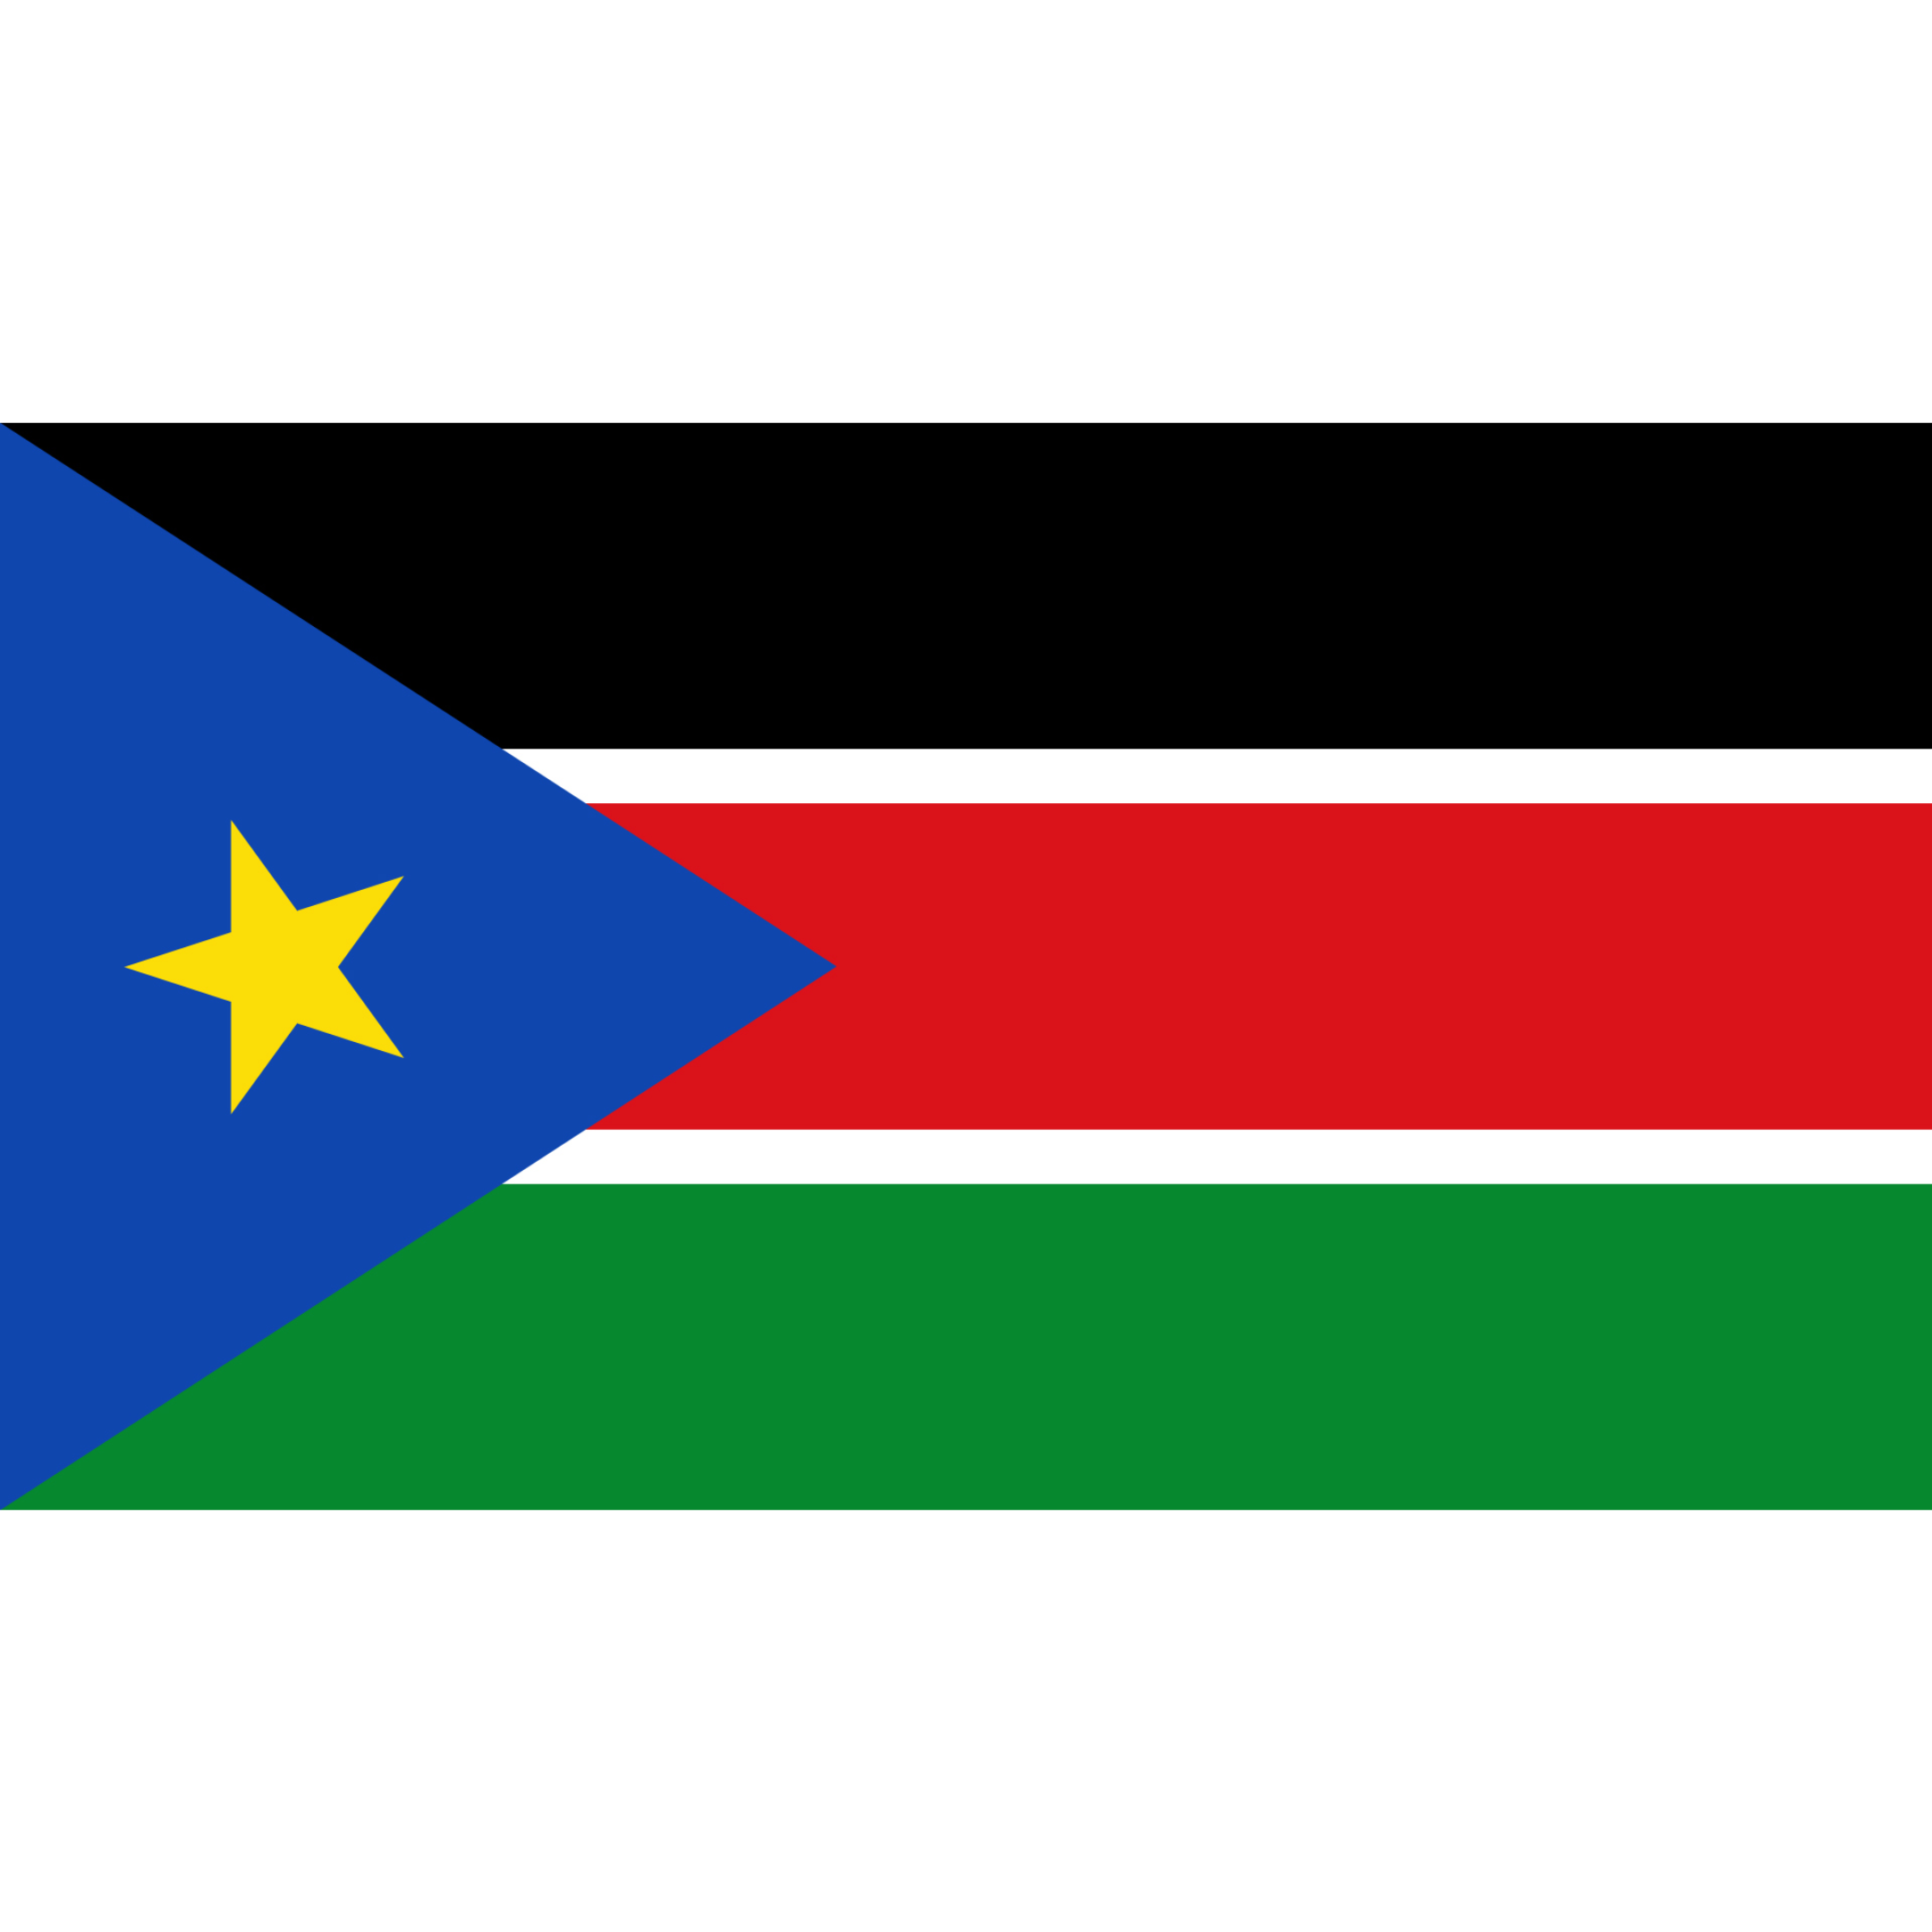 South Sudan's flag has 3 horizontal black, red and green bands divided by white stripes with a blue triangle and gold star.South Sudan's flag has 3 horizontal black, red and green bands divided by white stripes with a blue triangle and gold star.